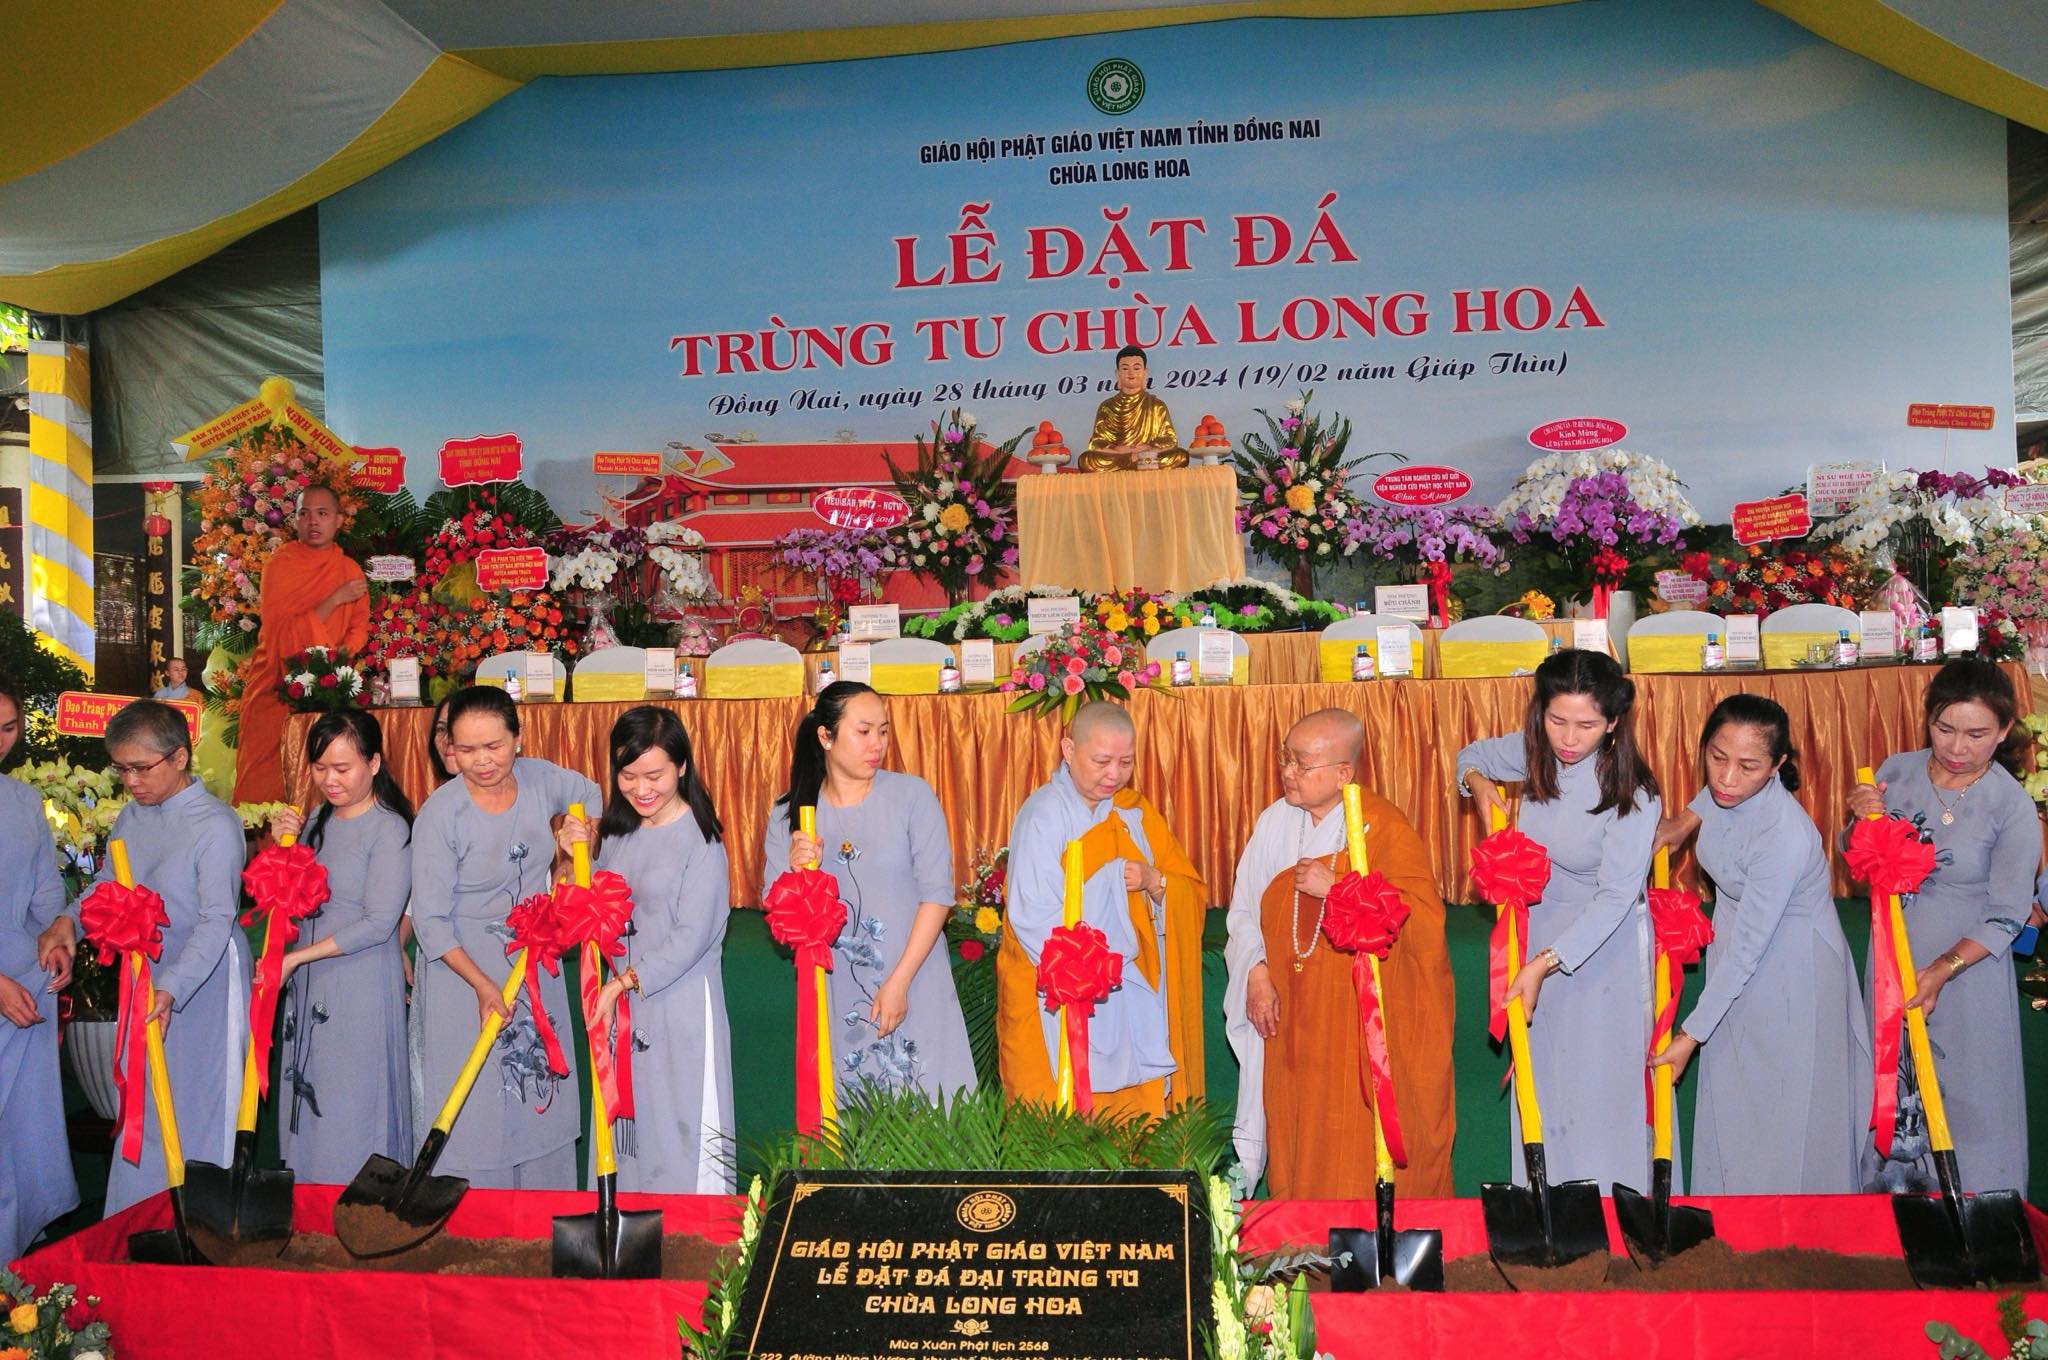 Buddhist nuns and Buddists make a symbolic gesture to lay a foundation stone for the restoration of Long Hoa Pagoda in Dong Nai Province, southern Vietnam. Photo: Supplied